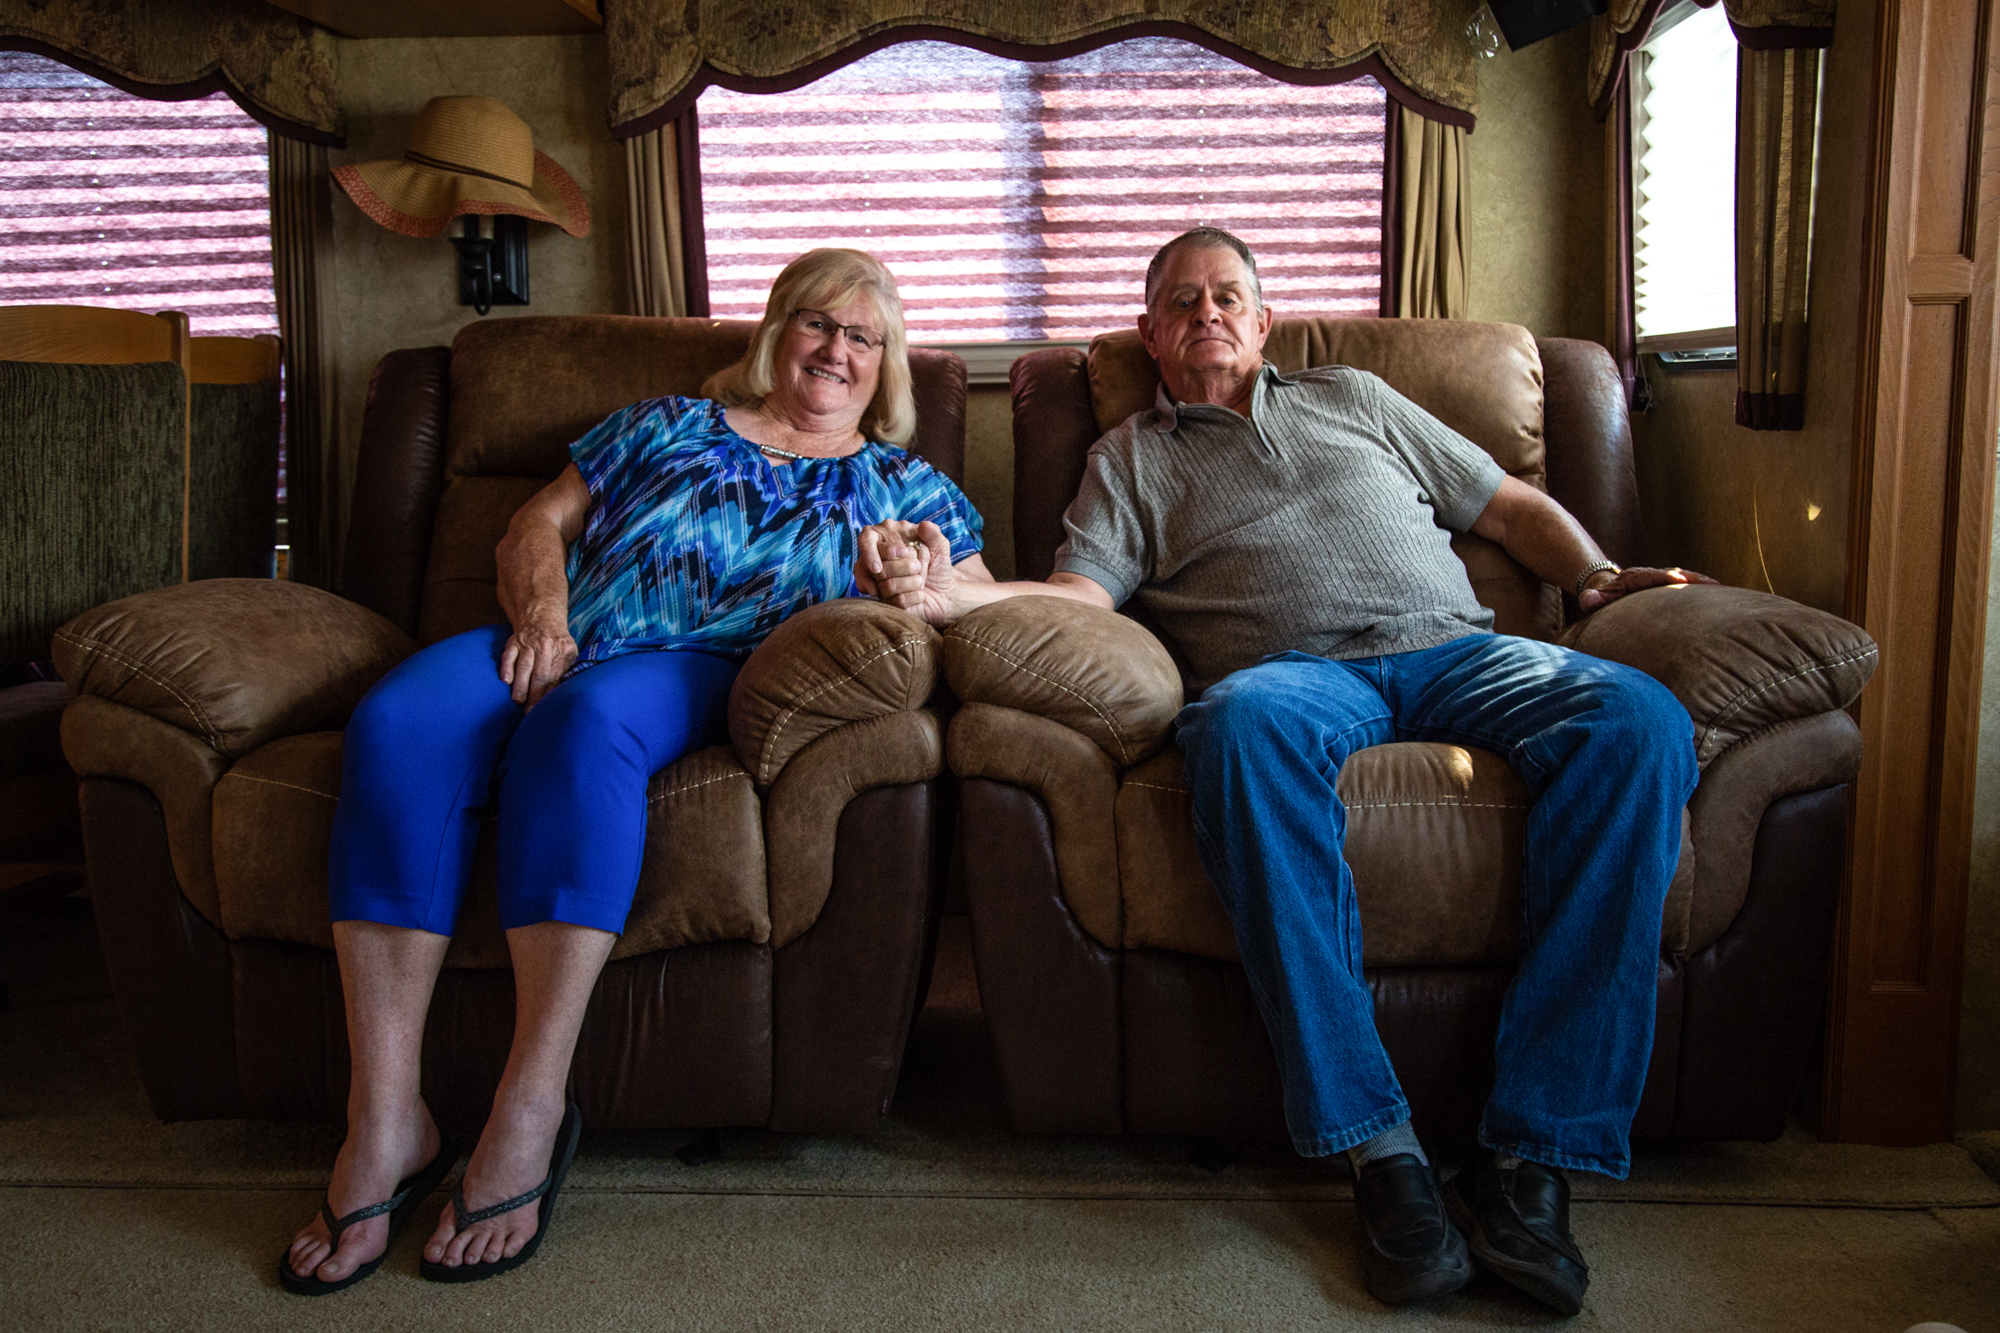 Ella and Dave Dover - After high winds pushed the Woodbury Fire in the direction of Roosevelt, Arizona, Ella and Dave Dover evacuated rather than lose their lives. They spent five days living in their RV on the Gila County Fairgrounds, which were opened to all evacuees. (Anton L. Delgado/News21)